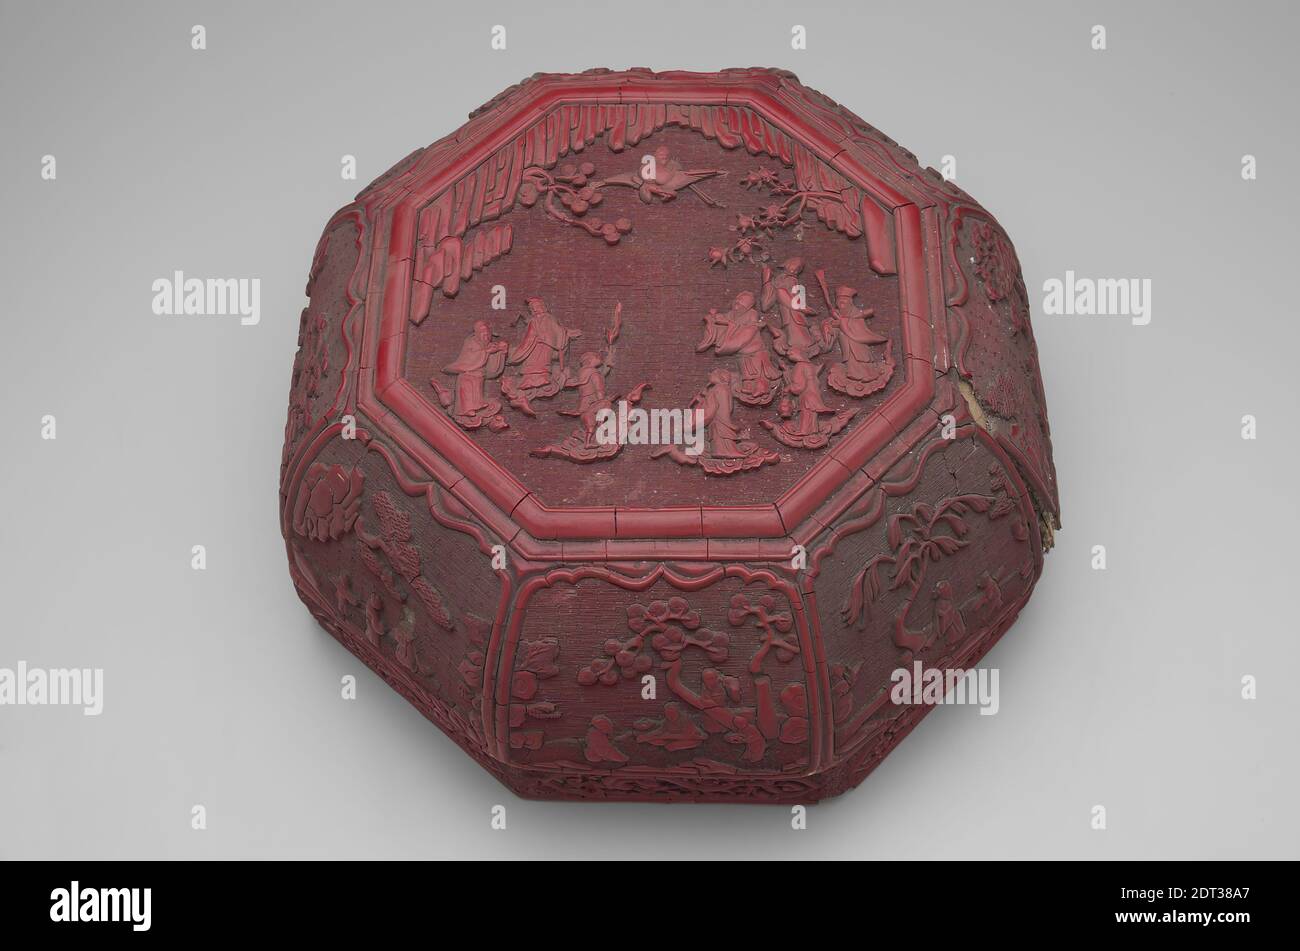 Box with Daoist Immortals, 19th century, Carved red lacquer, 6 1/16 × 12 3/4 in. (15.4 × 32.4 cm), China, Chinese, Qing dynasty (1644–1911), Containers - Wood Stock Photo